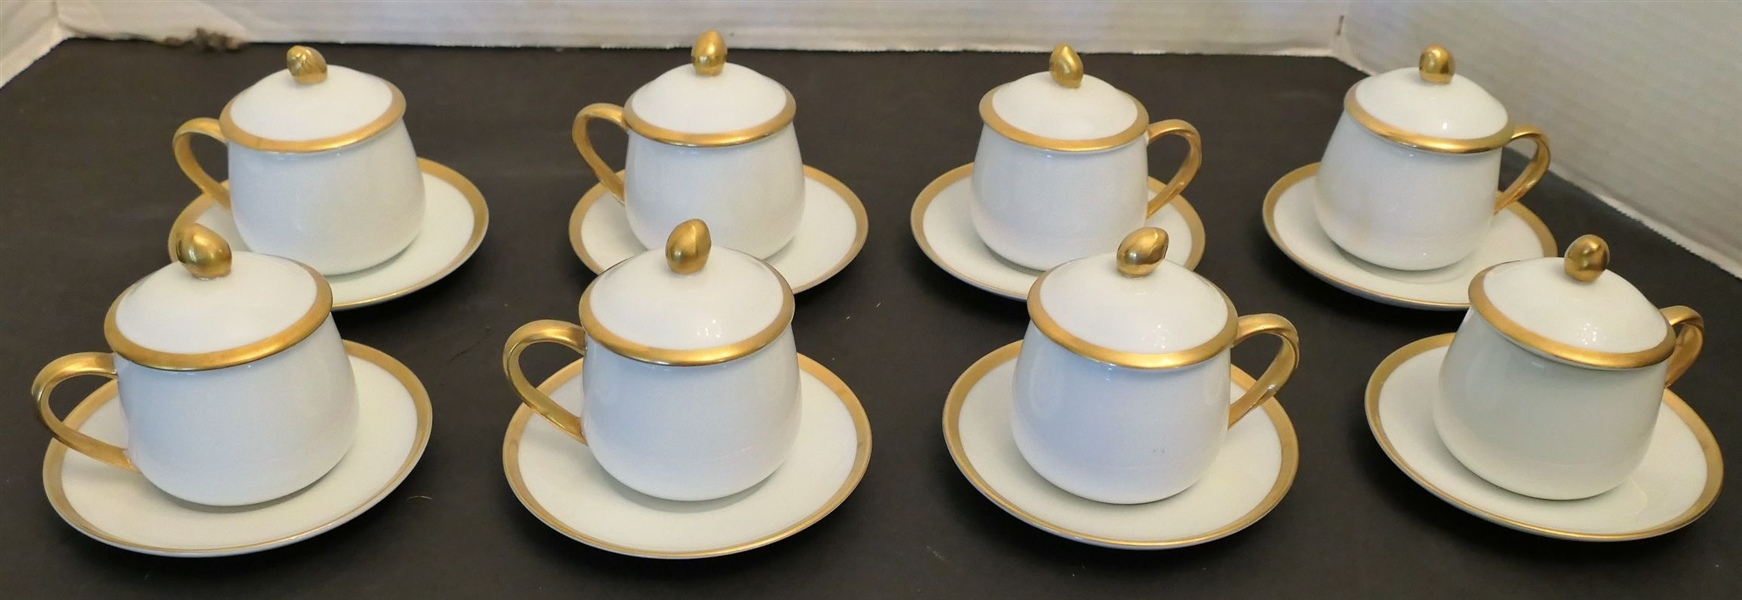 8 Fitz and Floyd Pot De Crème Cup, Lid, and Saucer Sets - White with Gold Trim 